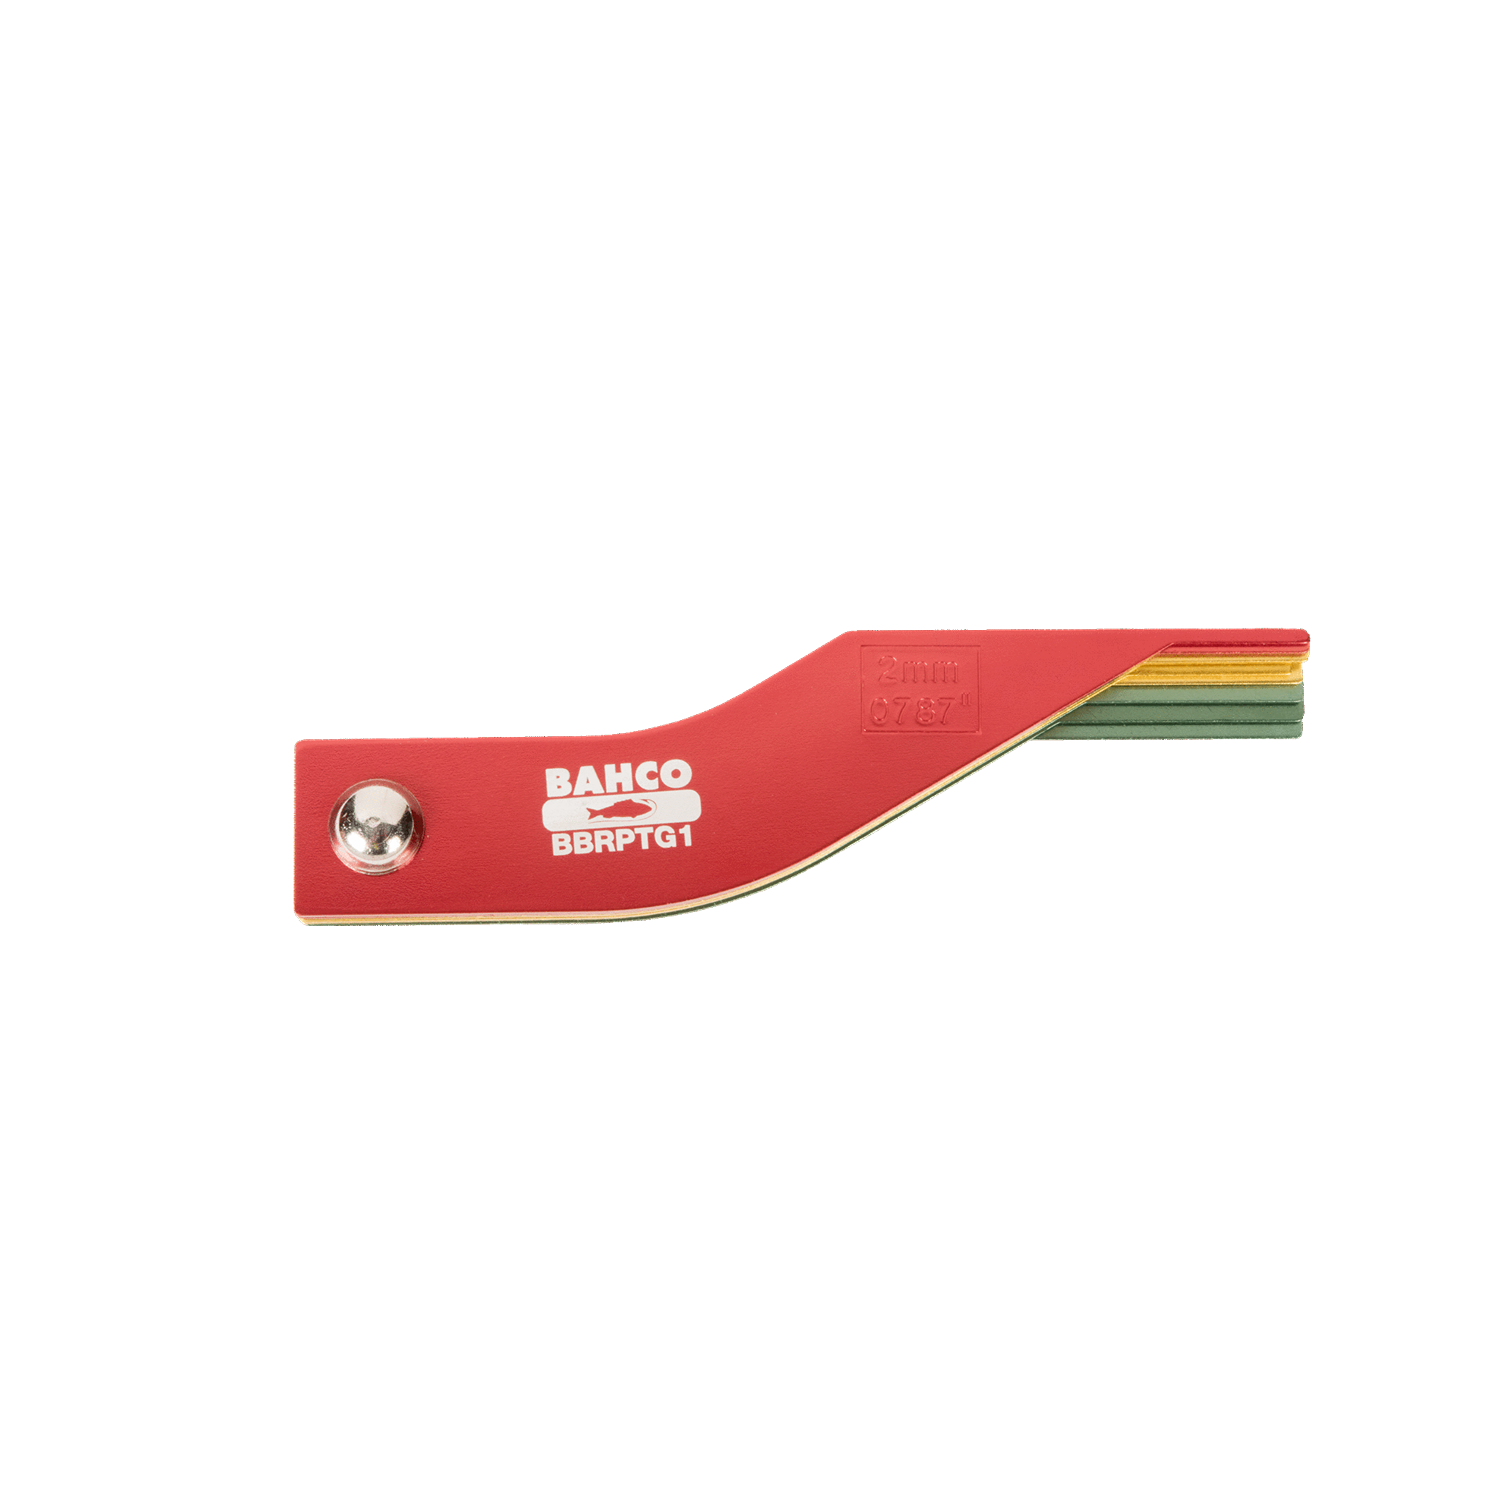 BAHCO BBRPTG1 Brake Pad Thickness Gauge (BAHCO Tools) - Premium Brake Pad Thickness Gauge from BAHCO - Shop now at Yew Aik.